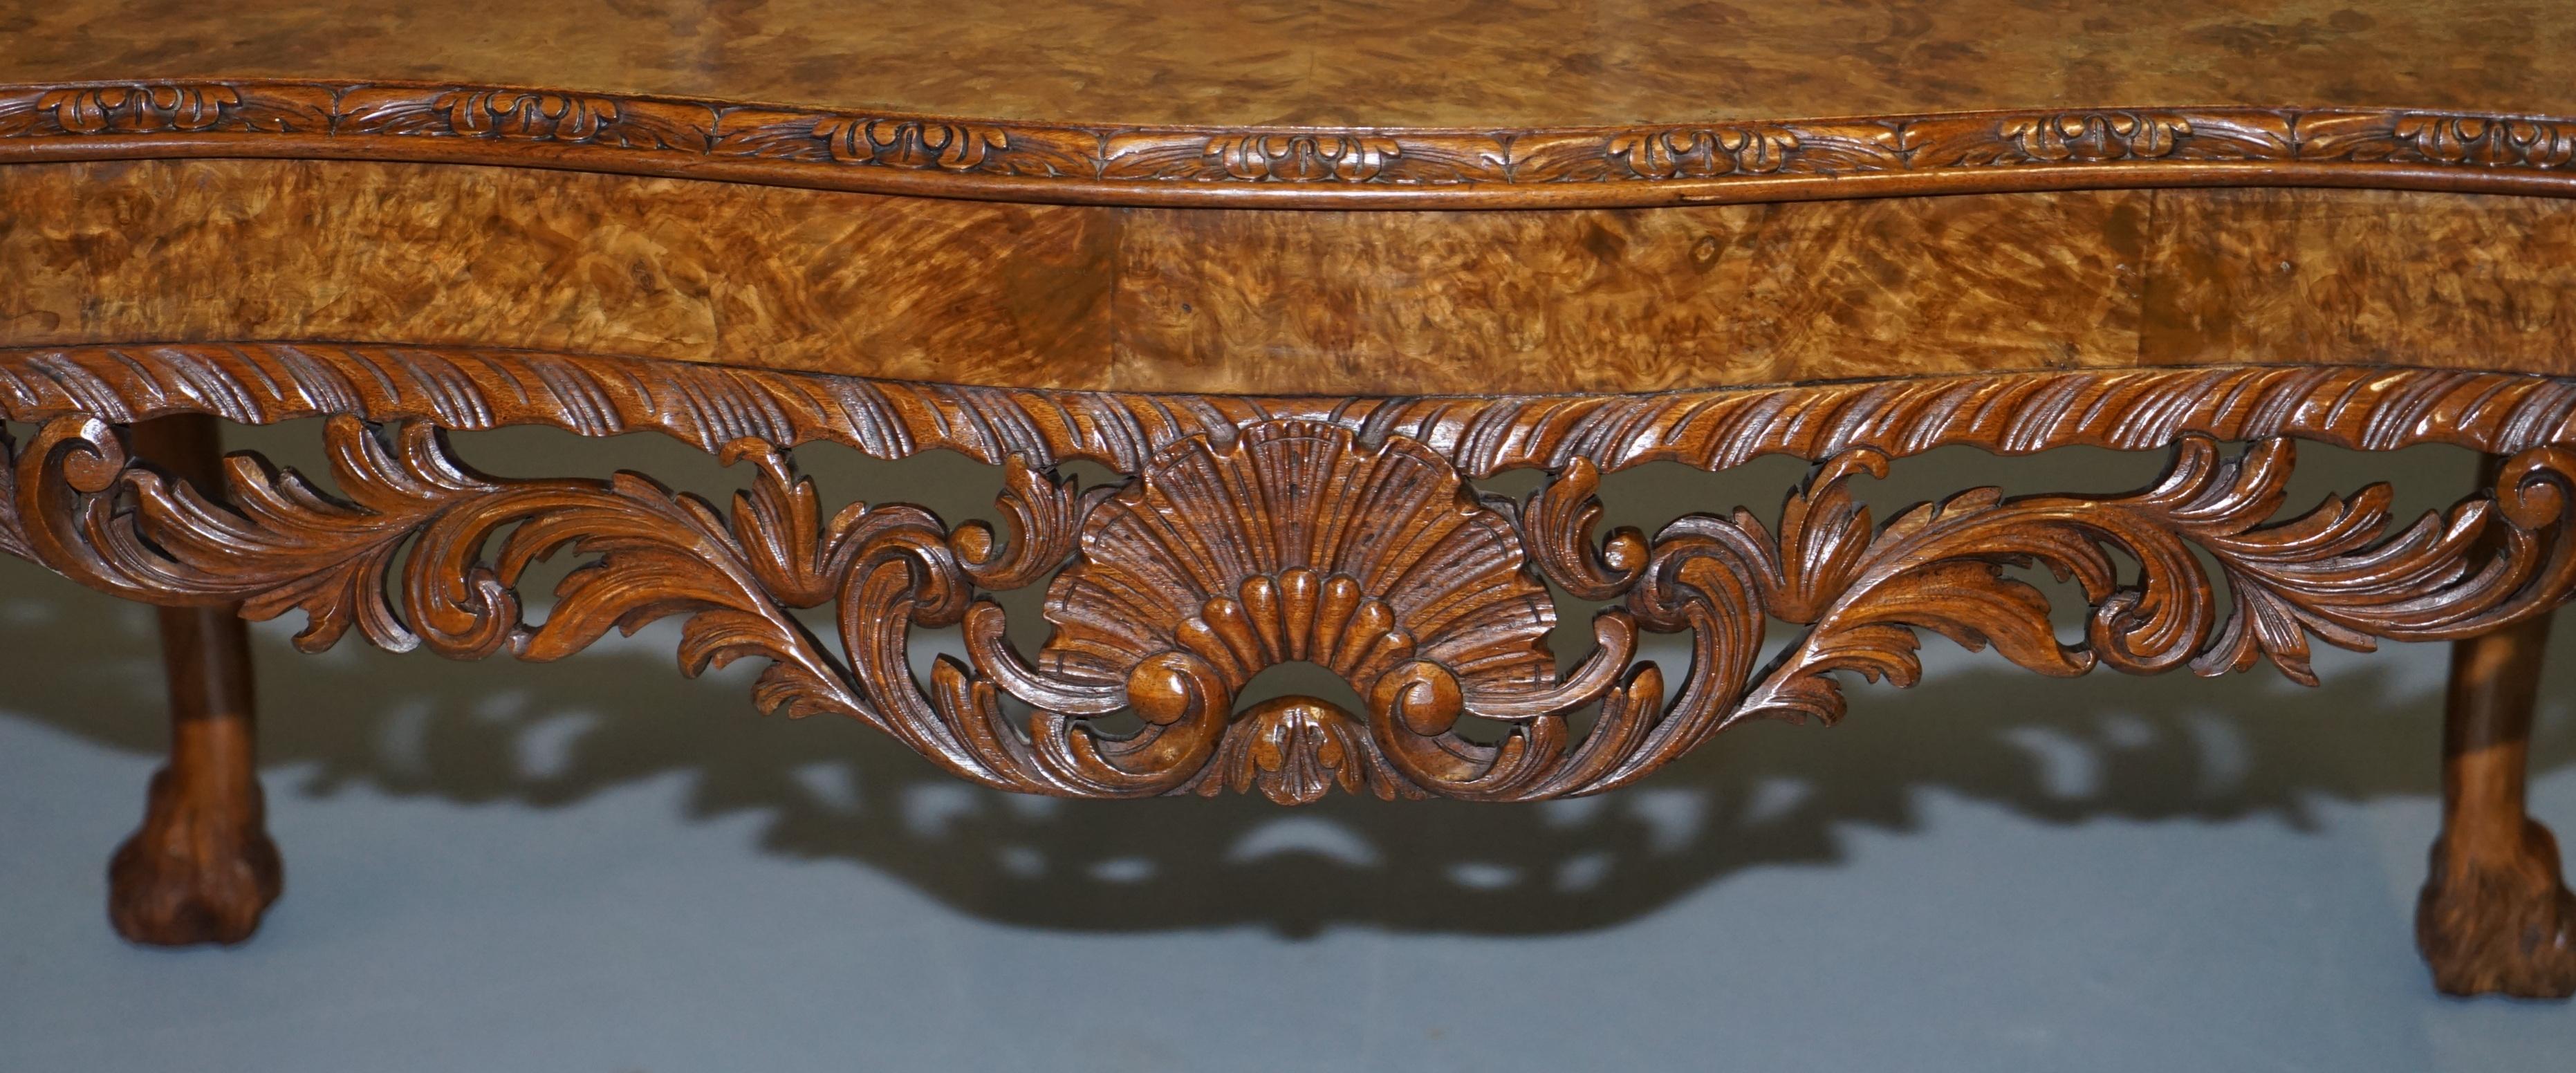 Stunning Vintage Burr Walnut Coffee Table with Ornately Carved Frame Lion Feet 1